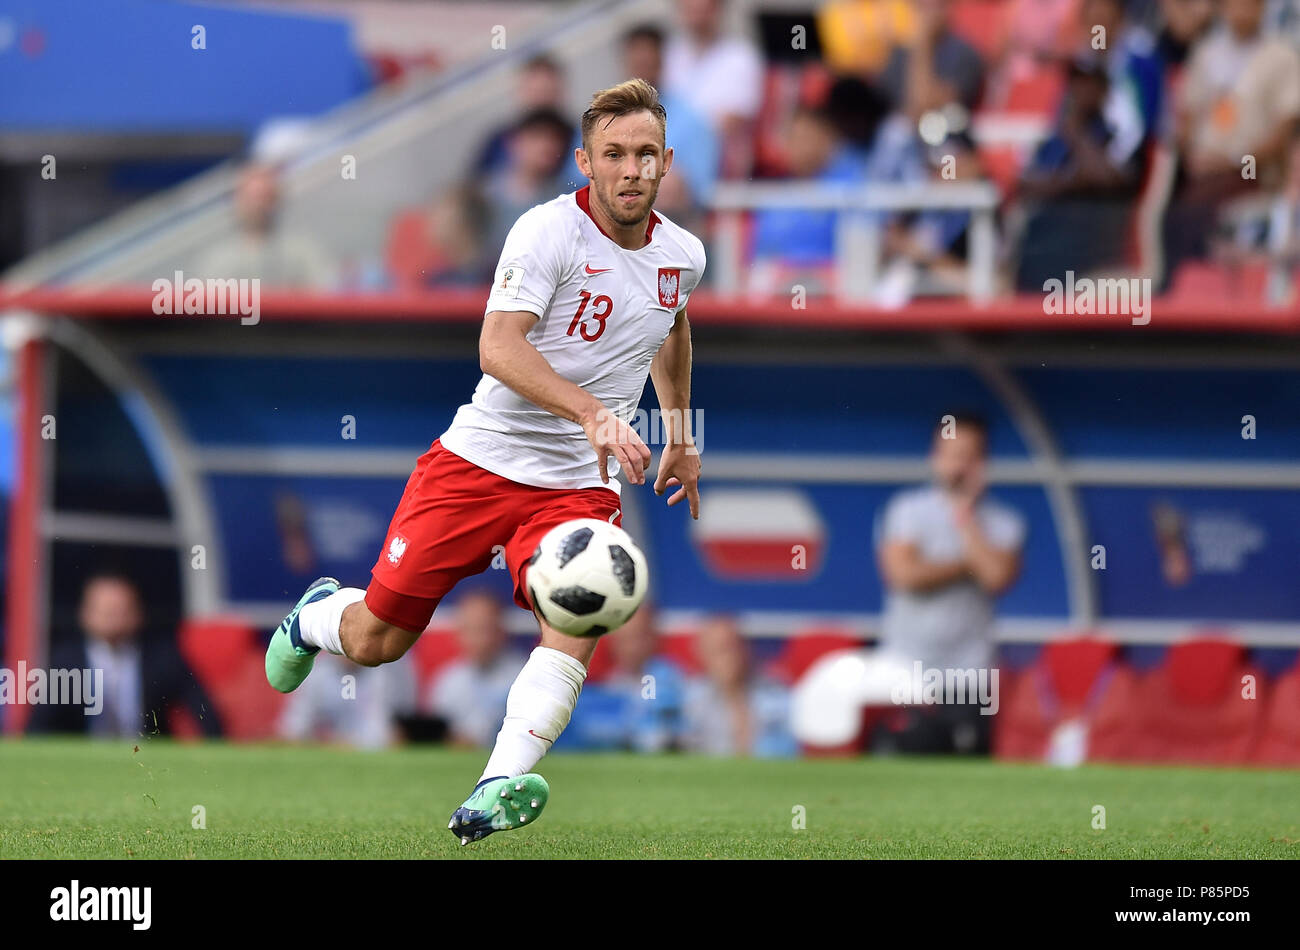 MOSCOW, RUSSIA - JUNE 19: Maciej Rybus of Poland in action during the 2018 FIFA World Cup Russia group H match between Poland and Senegal at Spartak Stadium on June 19, 2018 in Moscow, Russia. (Photo by Lukasz Laskowski/PressFocus/MB Media) Stock Photo